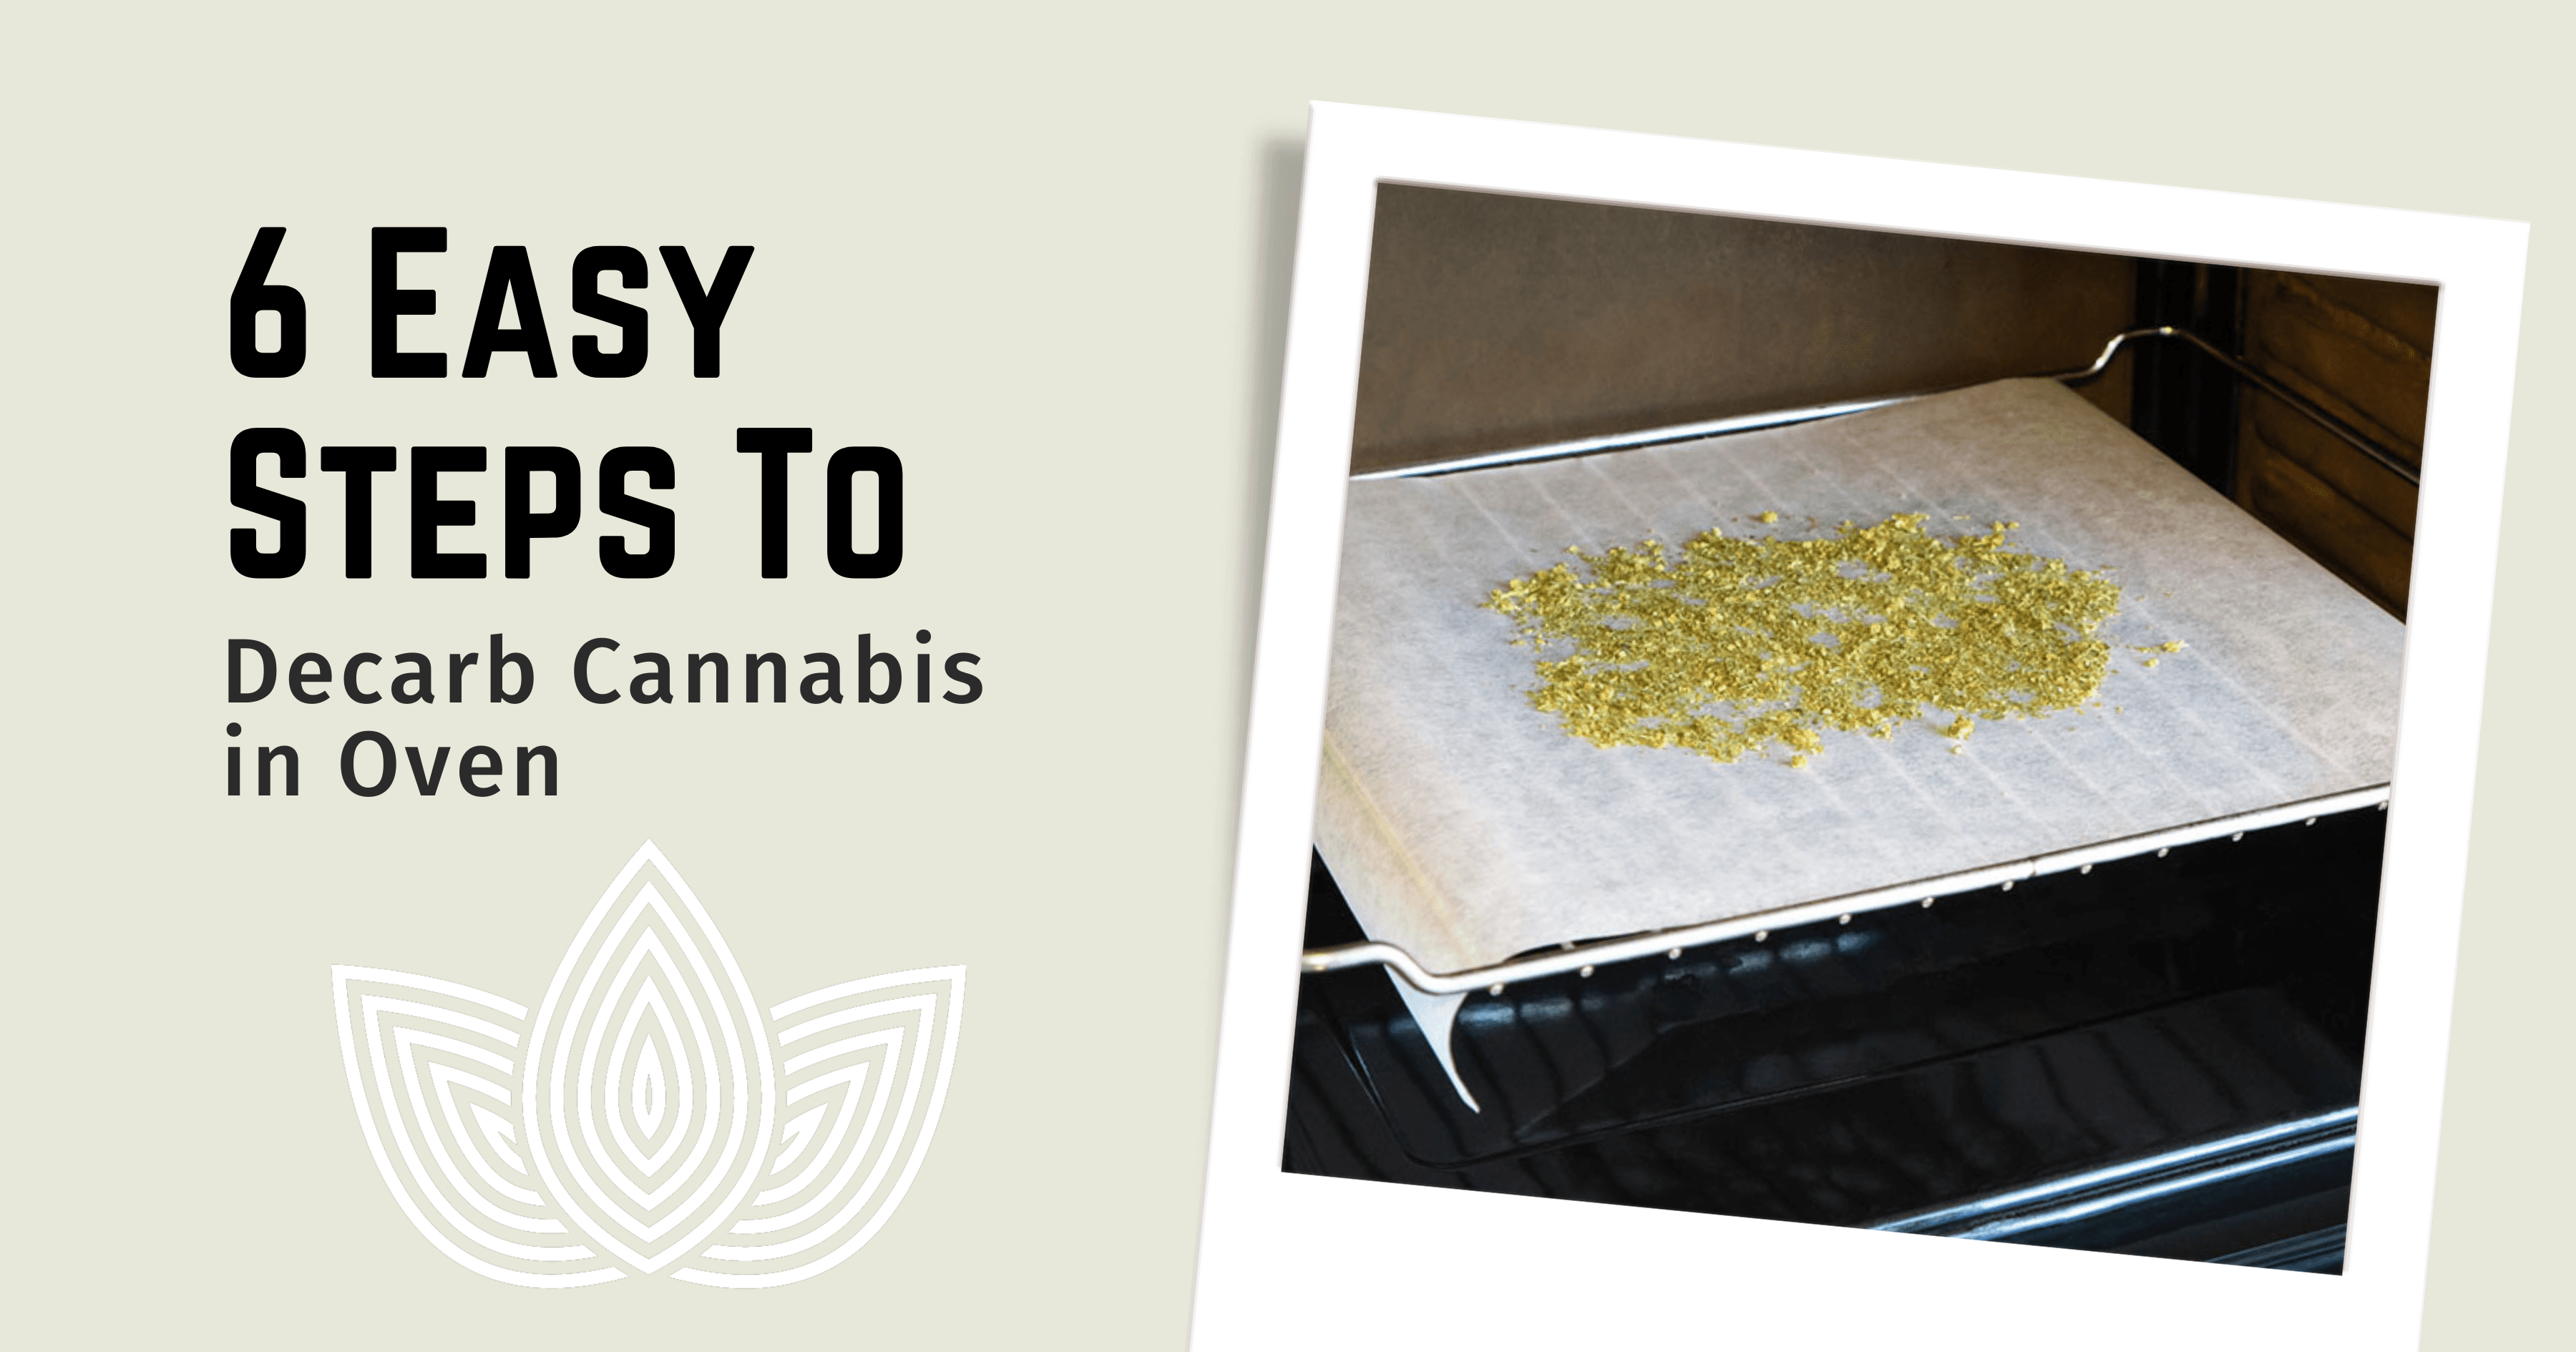 6 Easy Steps to Decarb Cannabis in Oven